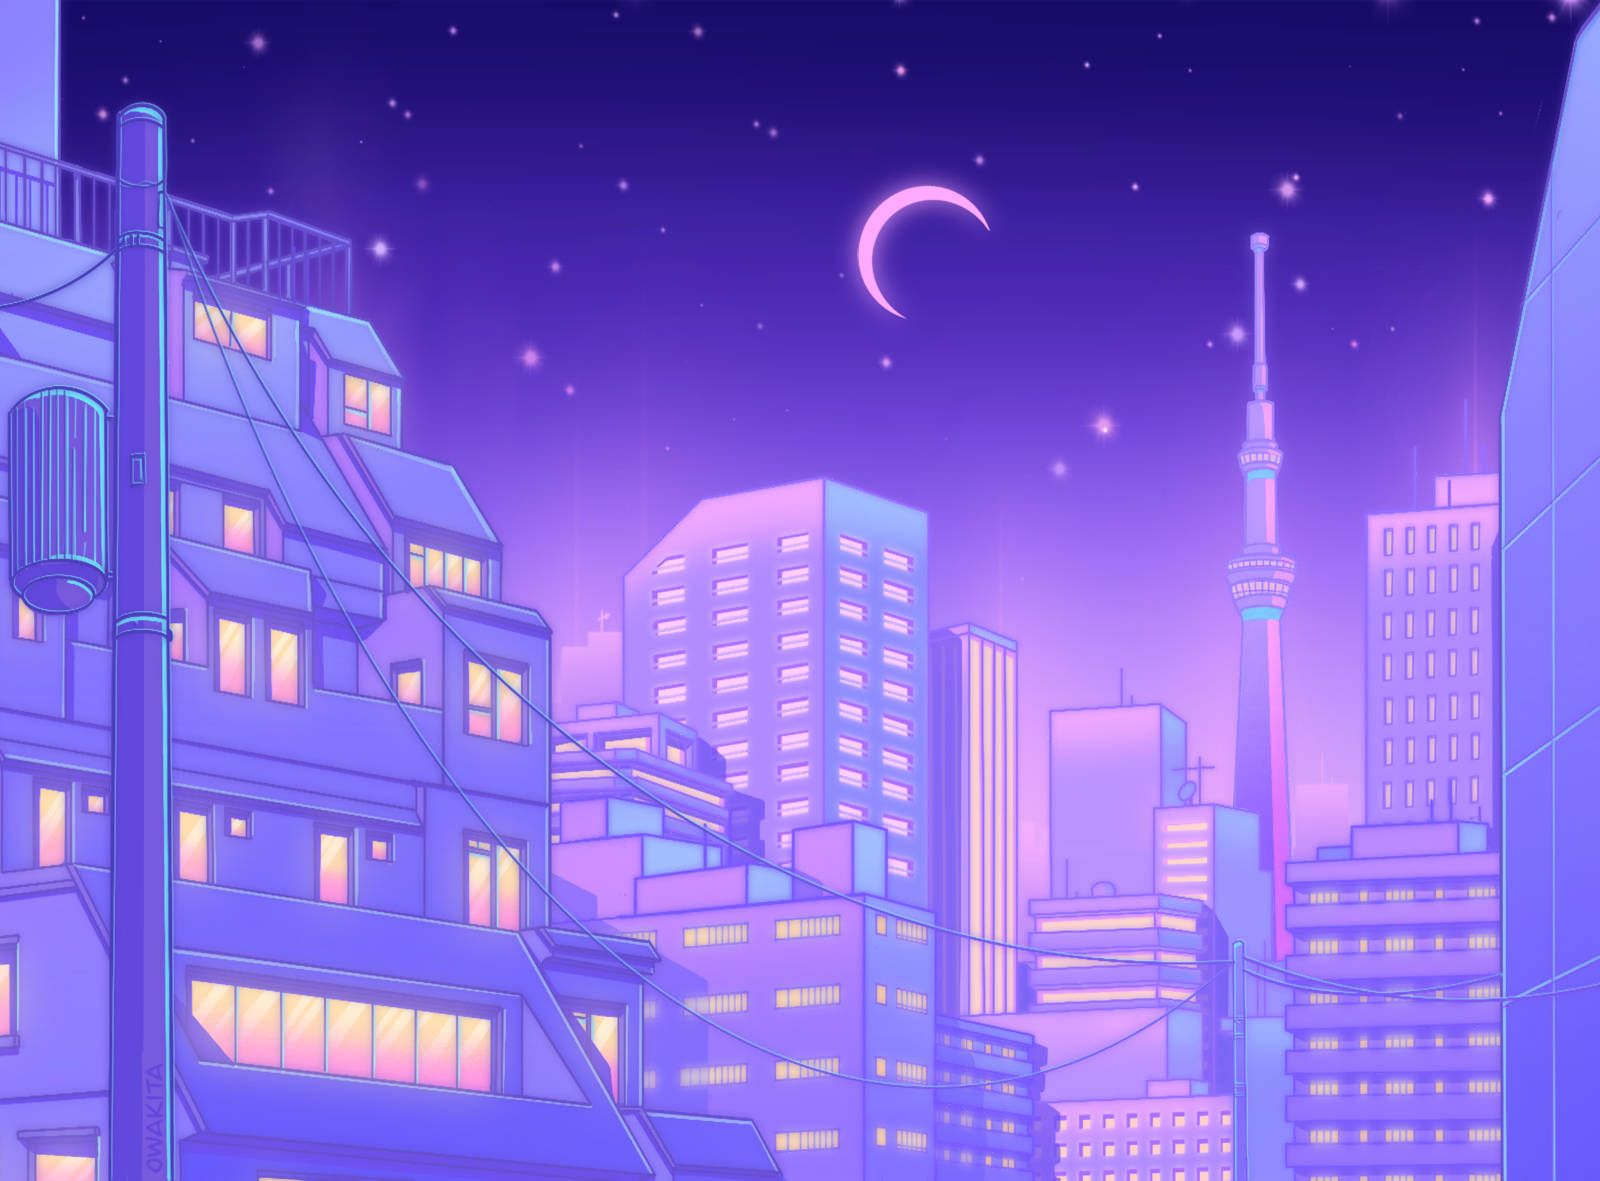 Aesthetic anime city wallpaper for phone with a purple and blue gradient. - Tokyo